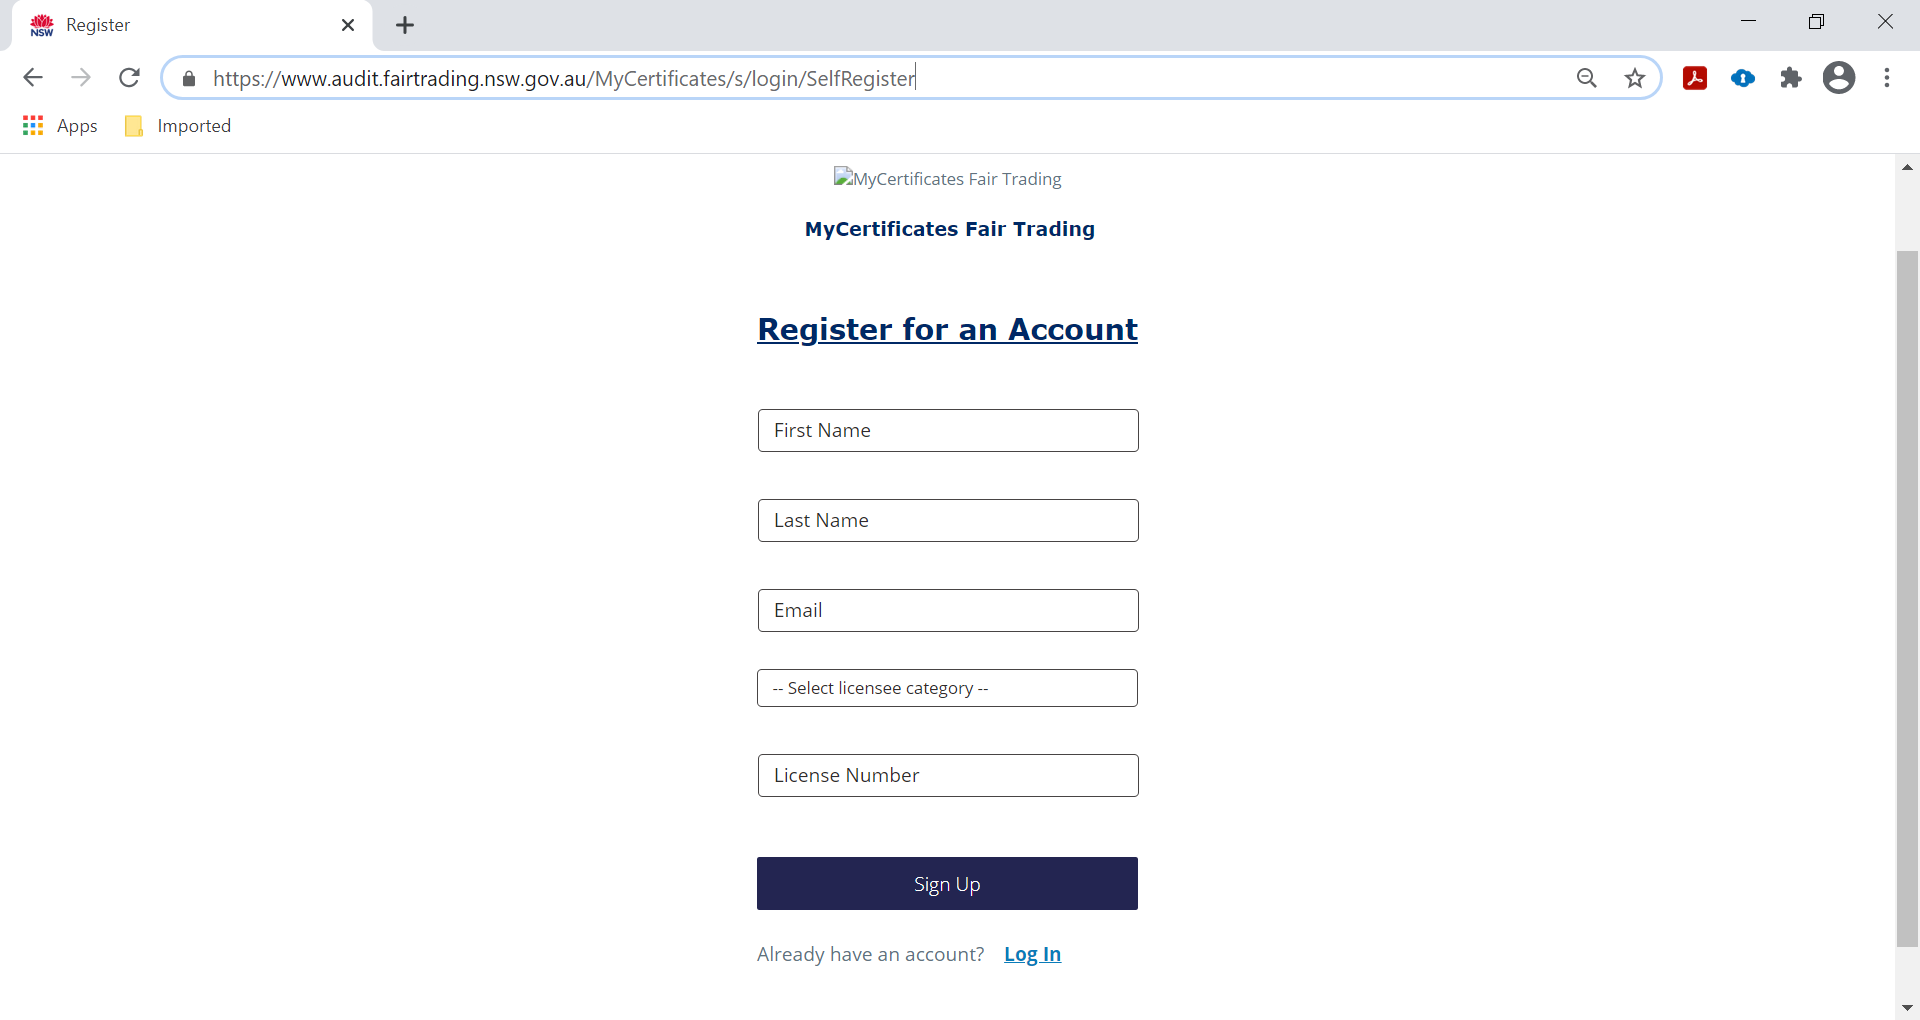 Image showing register page for MyCertificates